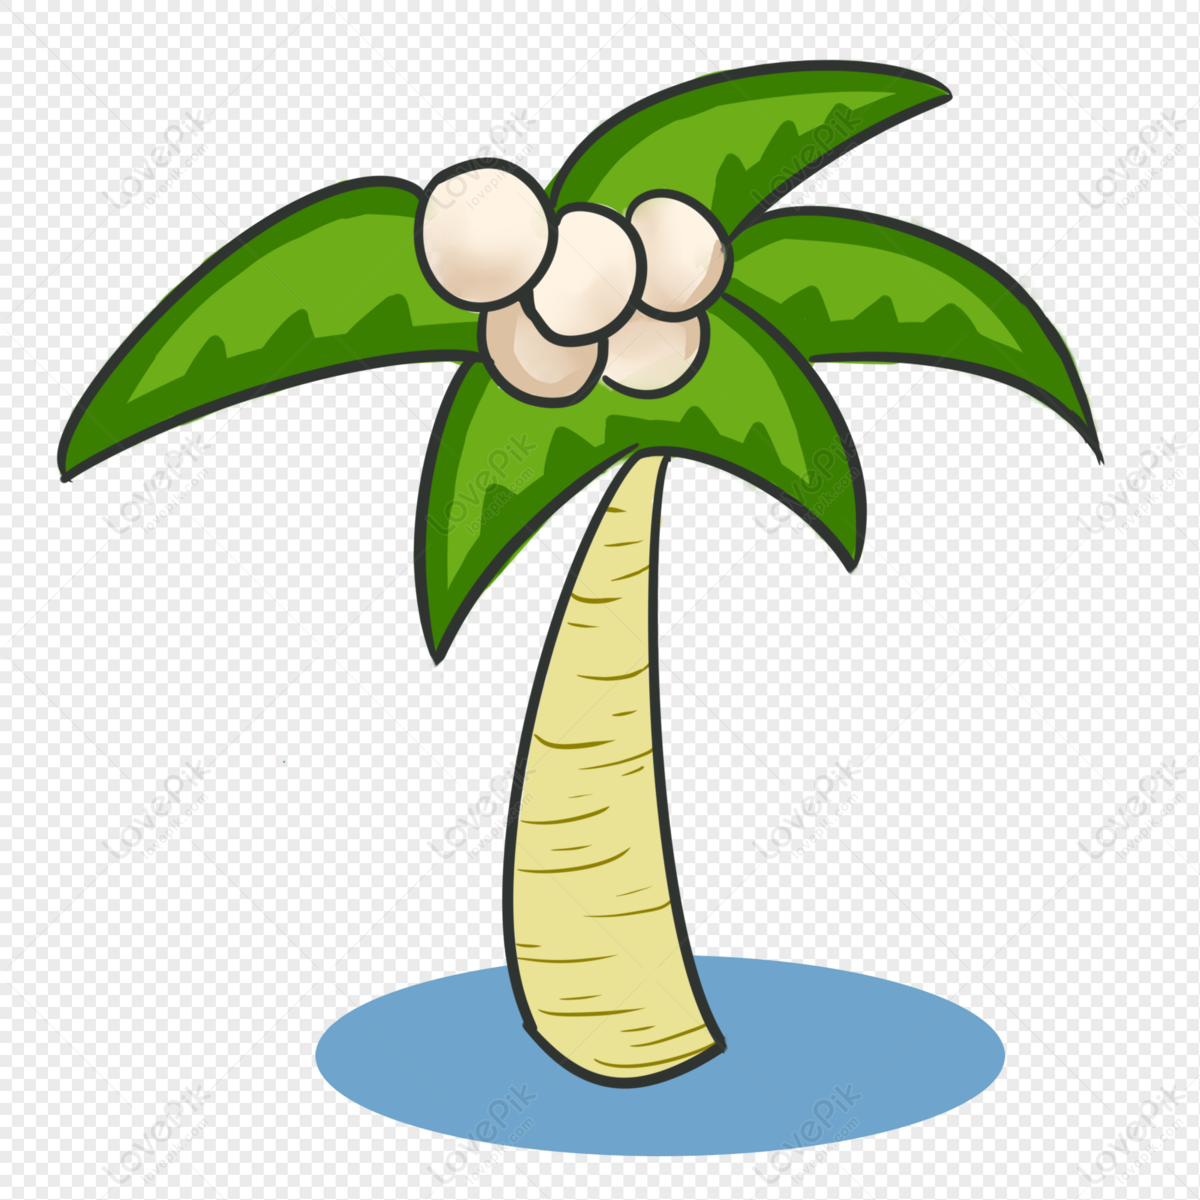 Green Coconut Tree Free PNG And Clipart Image For Free Download - Lovepik |  401180019